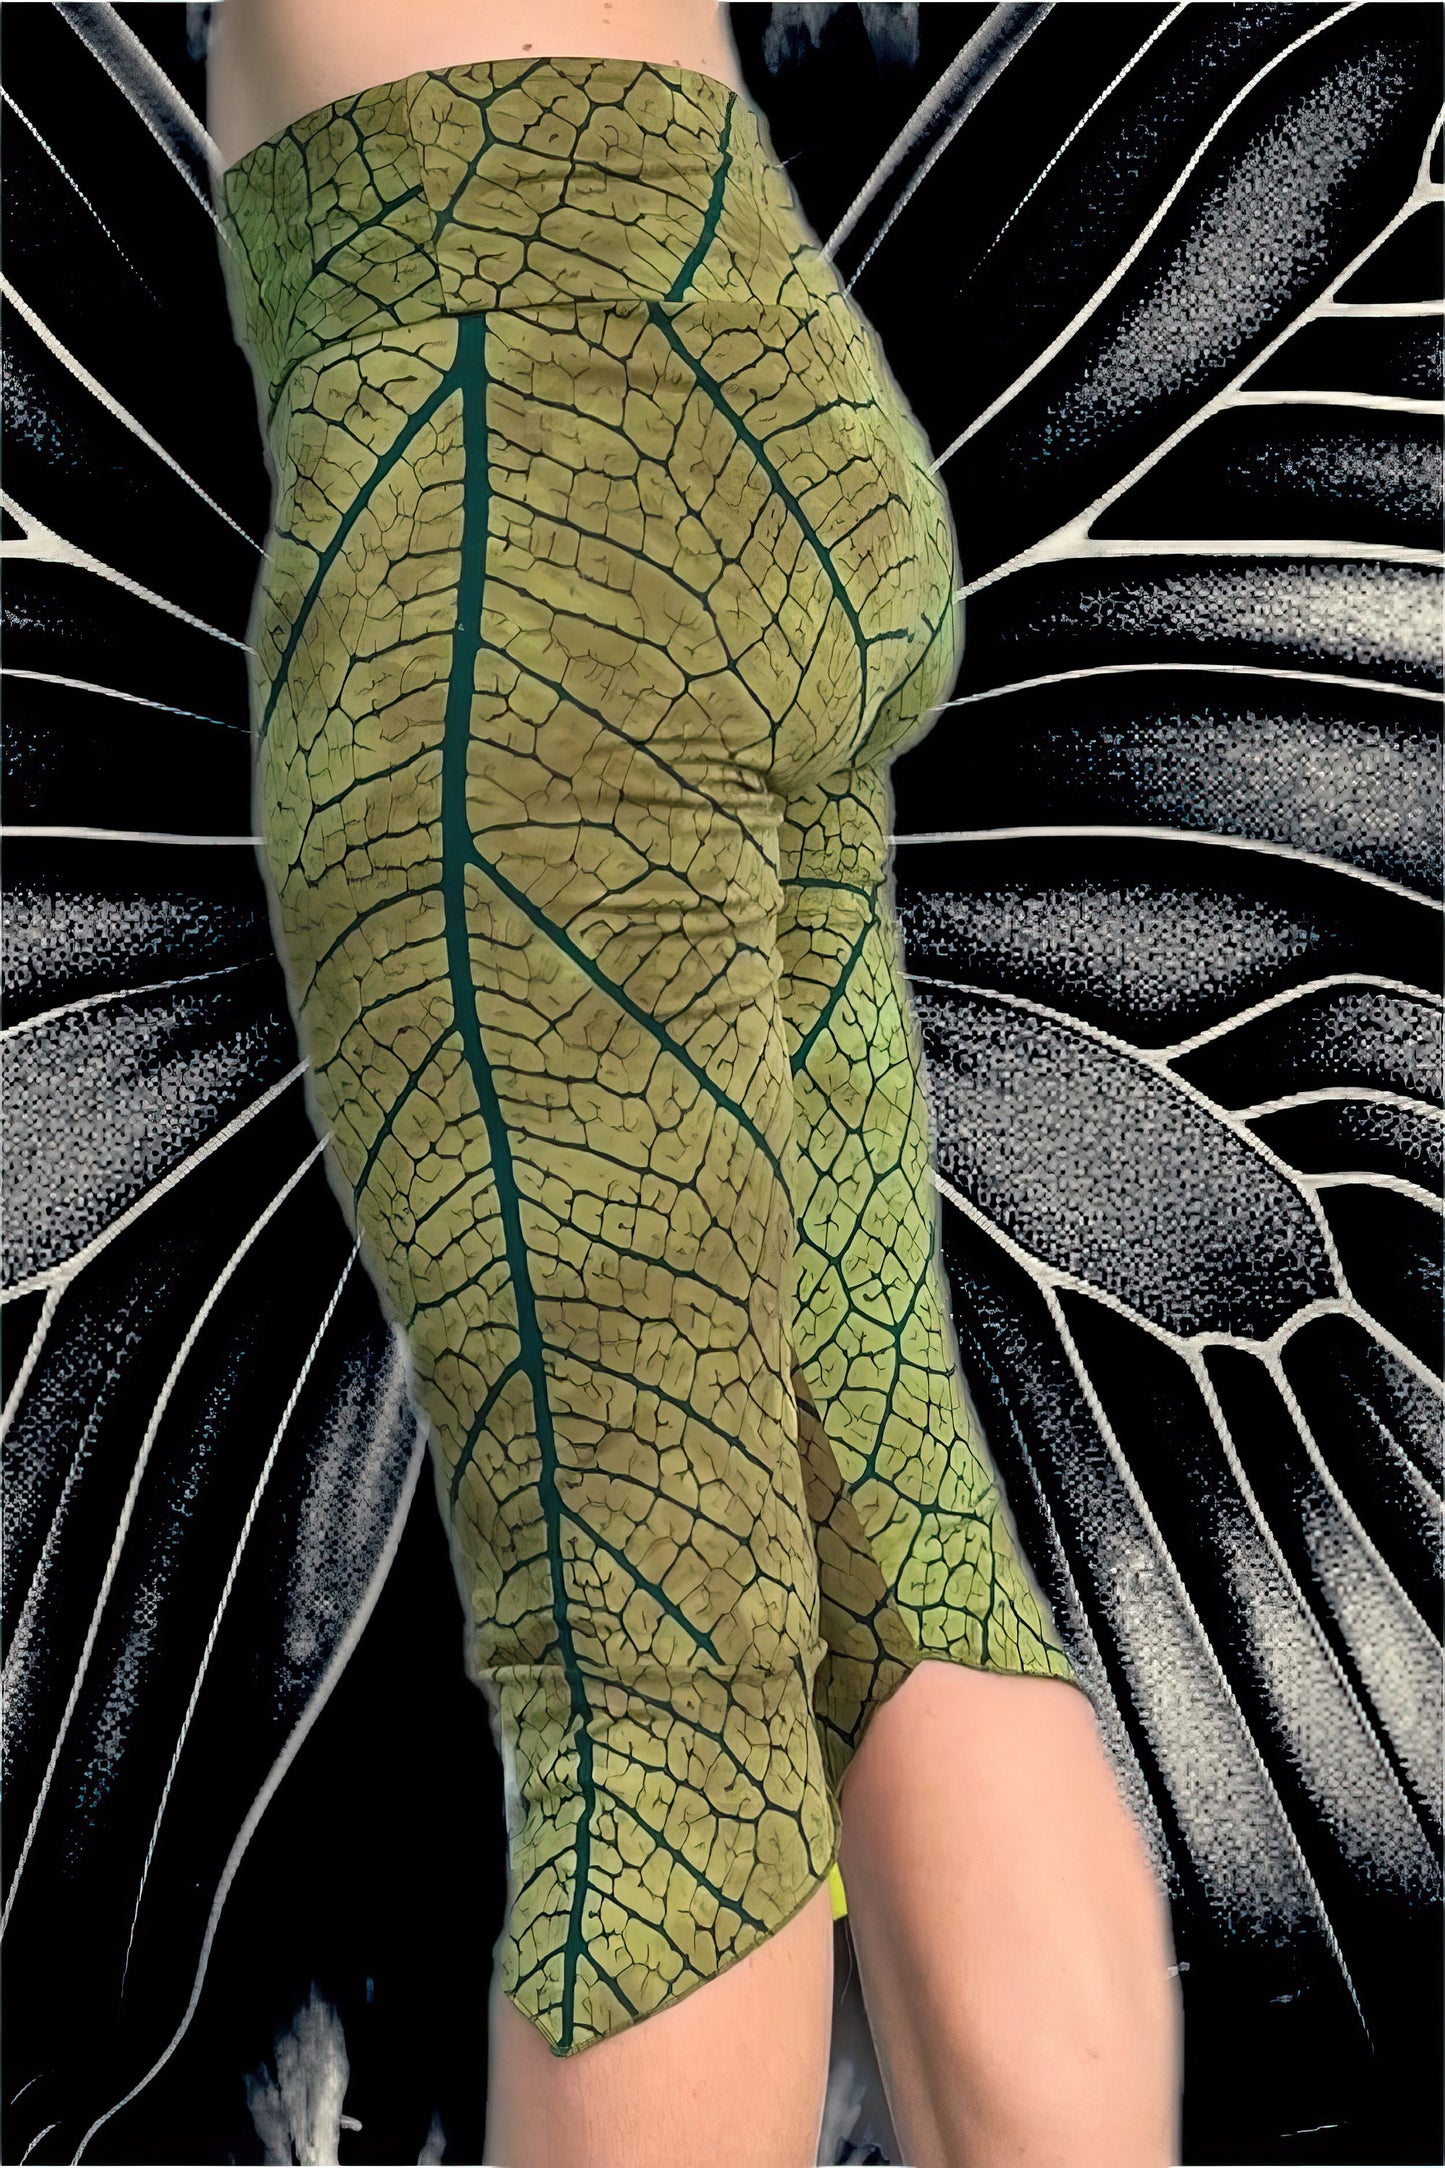 Handmade 3/4 Length Leafy Leggings - tights - organic cotton - hand printed and stitched by me